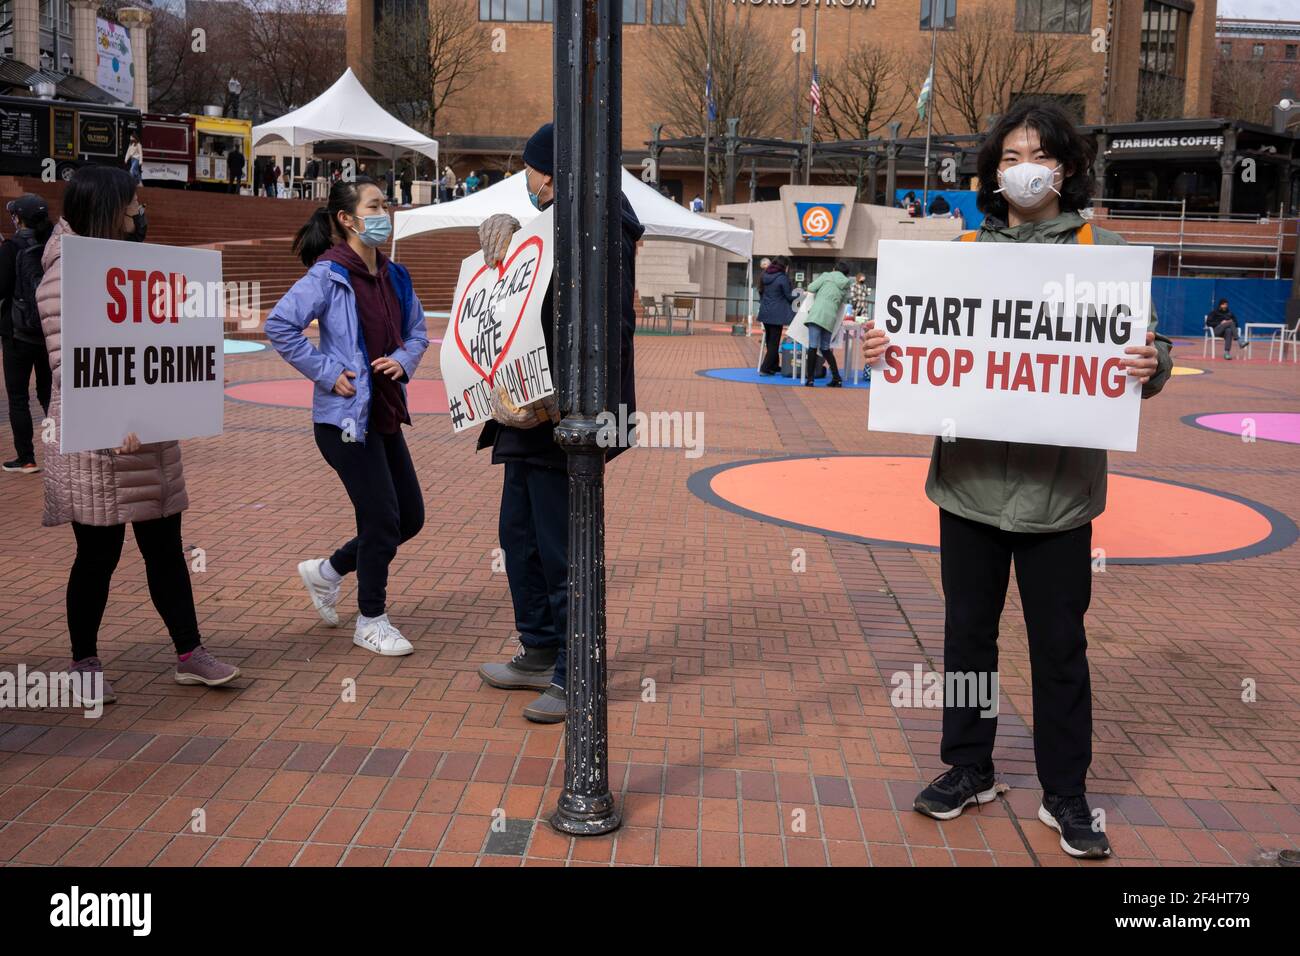 Peaceful demonstrators are seen in downtown Portland's Pioneer Courthouse Square denouncing violence against Asian Americans on Sunday, March 21, 2021. Stock Photo